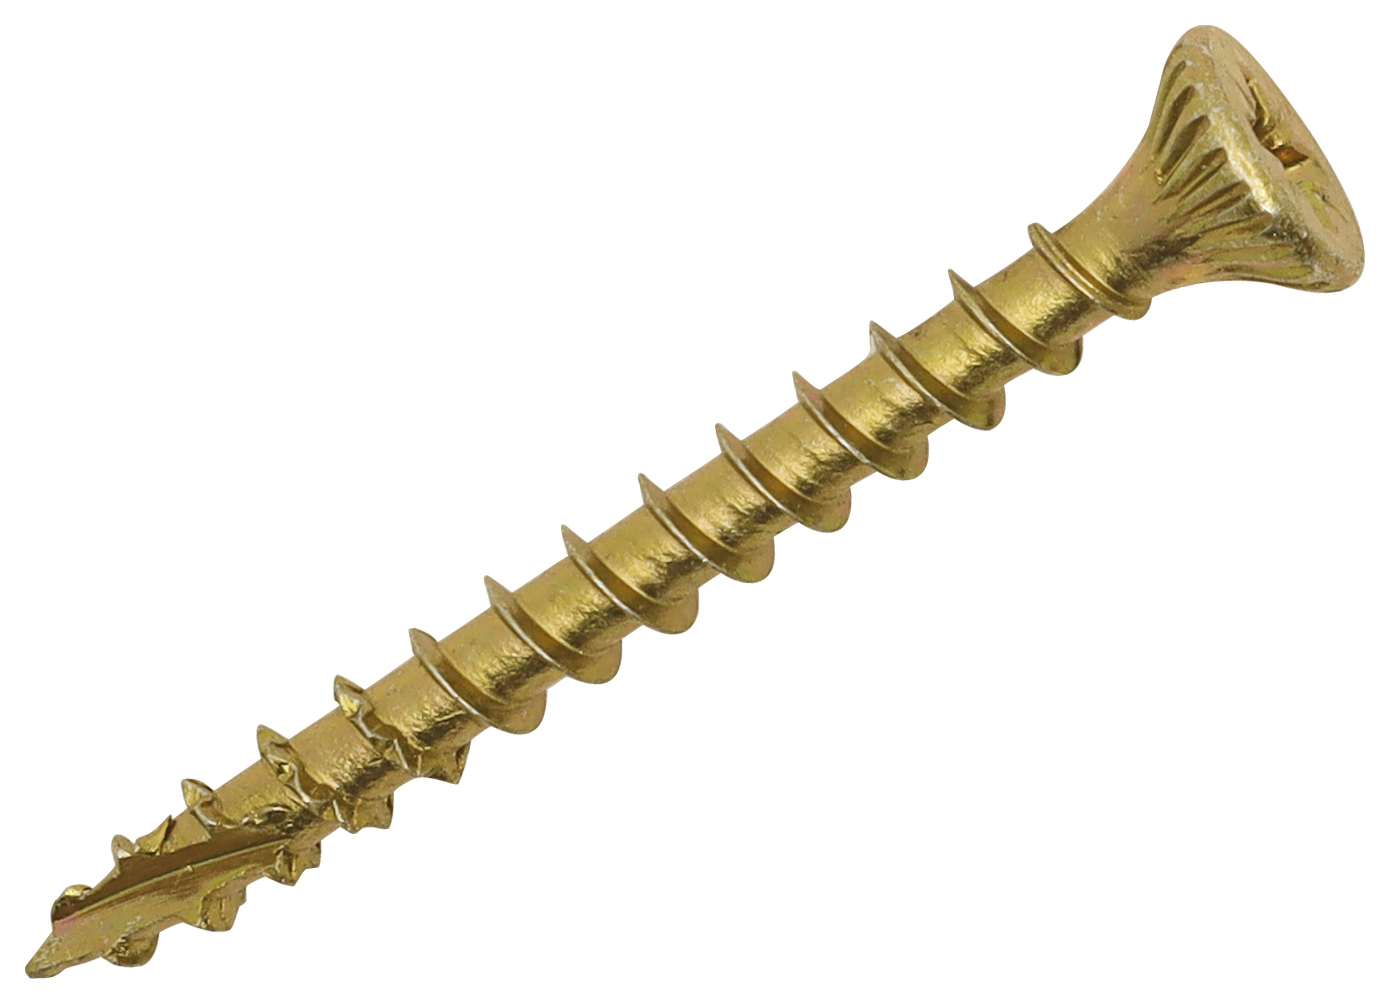 Image of Optimaxx PZ Countersunk Passivated Double Reinforced Wood Screw - 5 x 50mm - Pack of 200